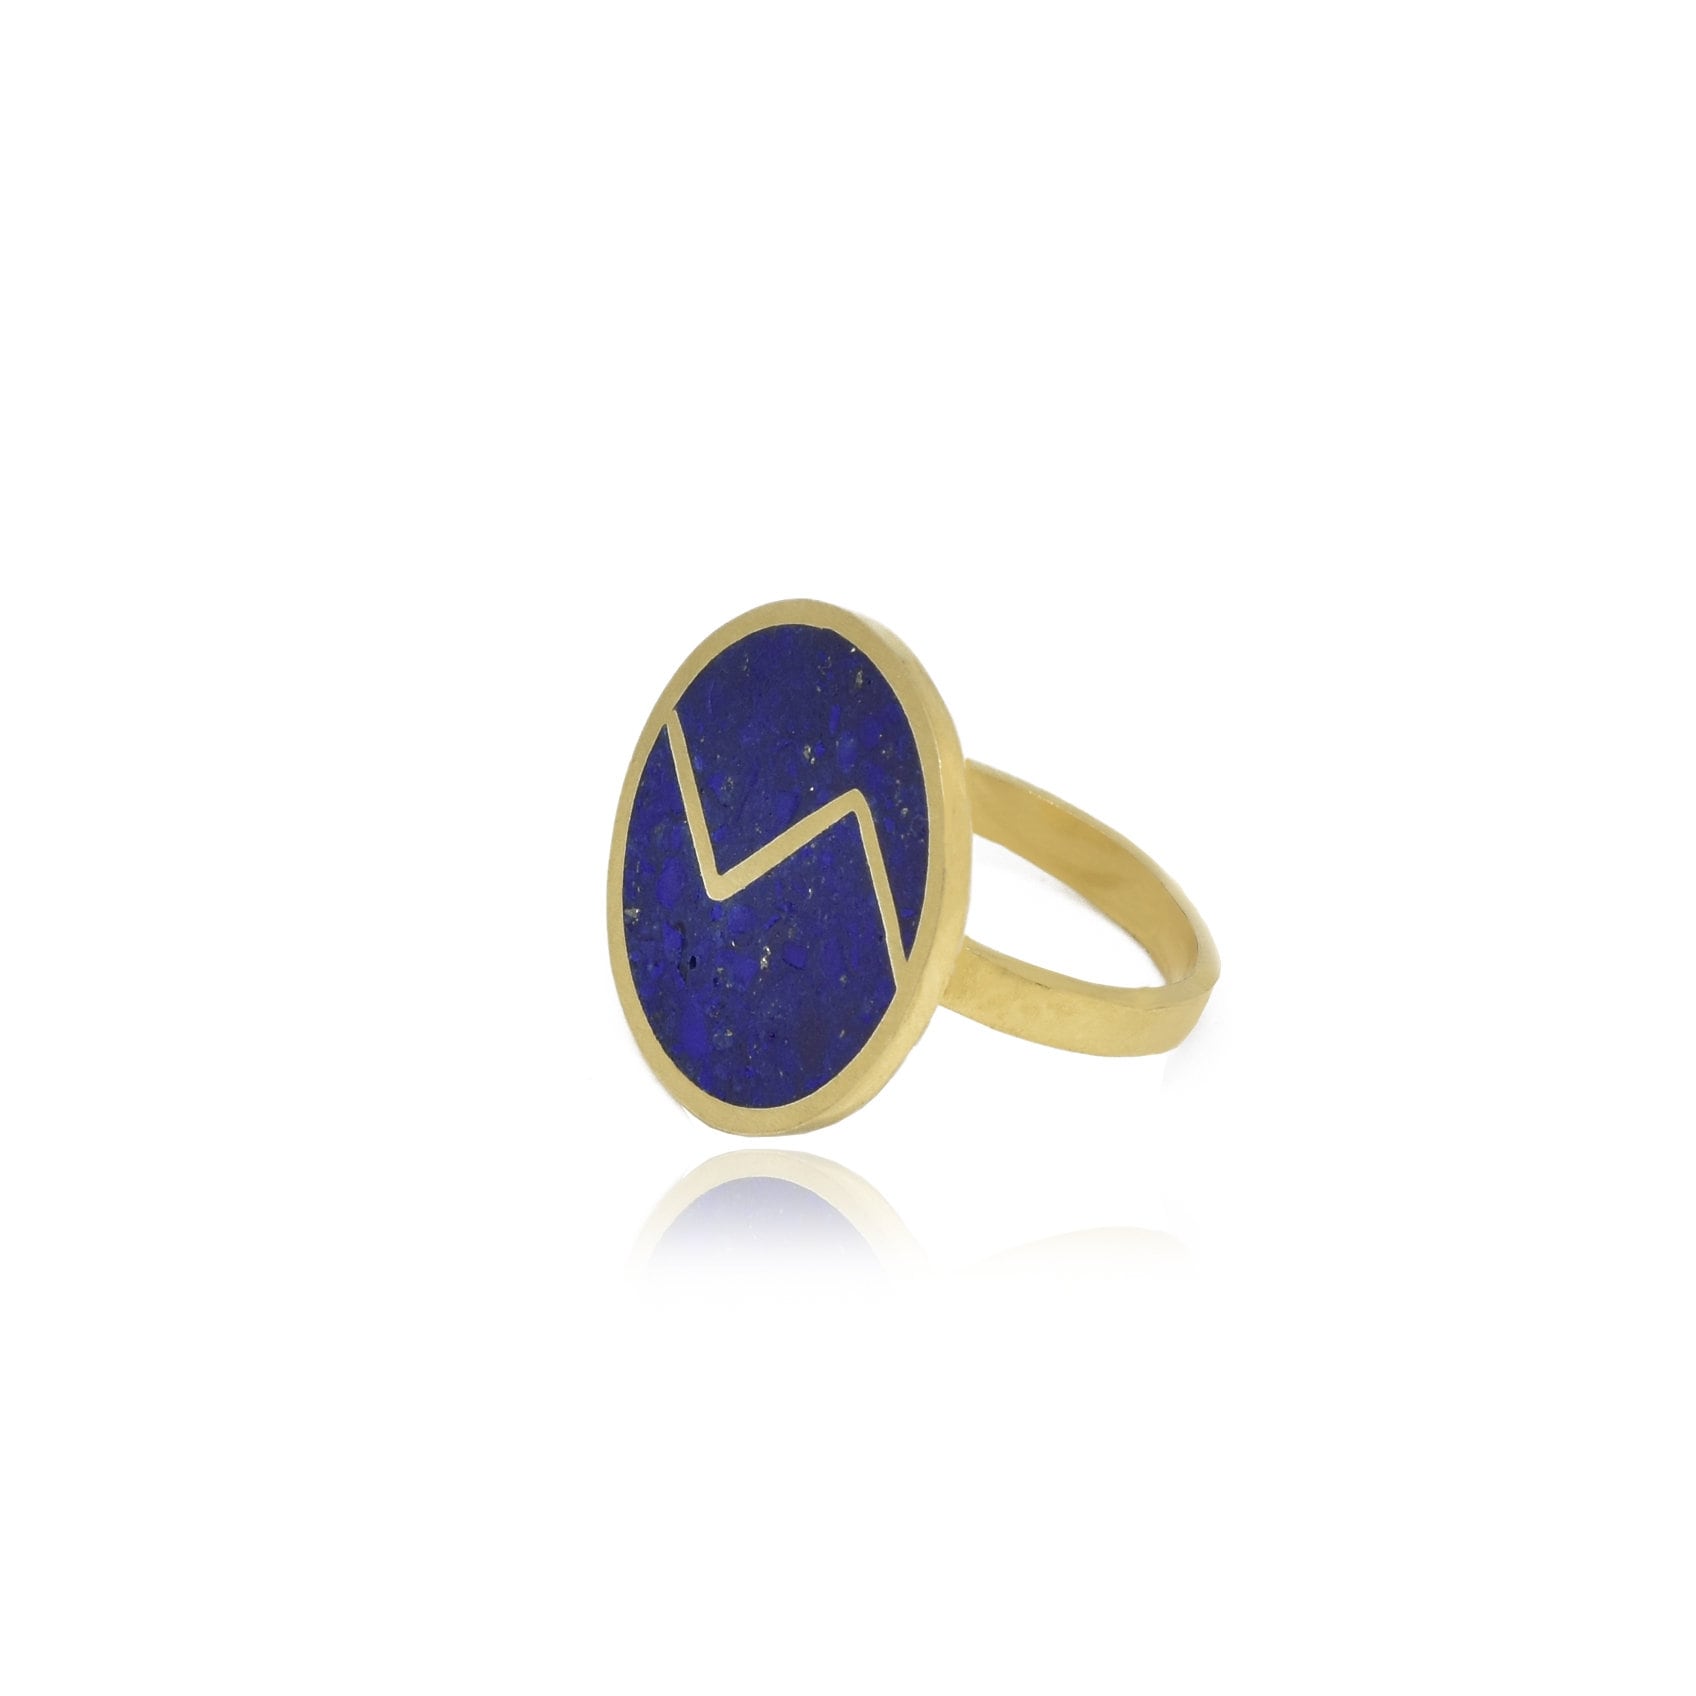 Handmade Afghan Blue Gemstone Lapis Lazuli Ring Disk Gold Plated Brass Elegant Inspired Jewelry Nature Abstract Mountain Gift for Her